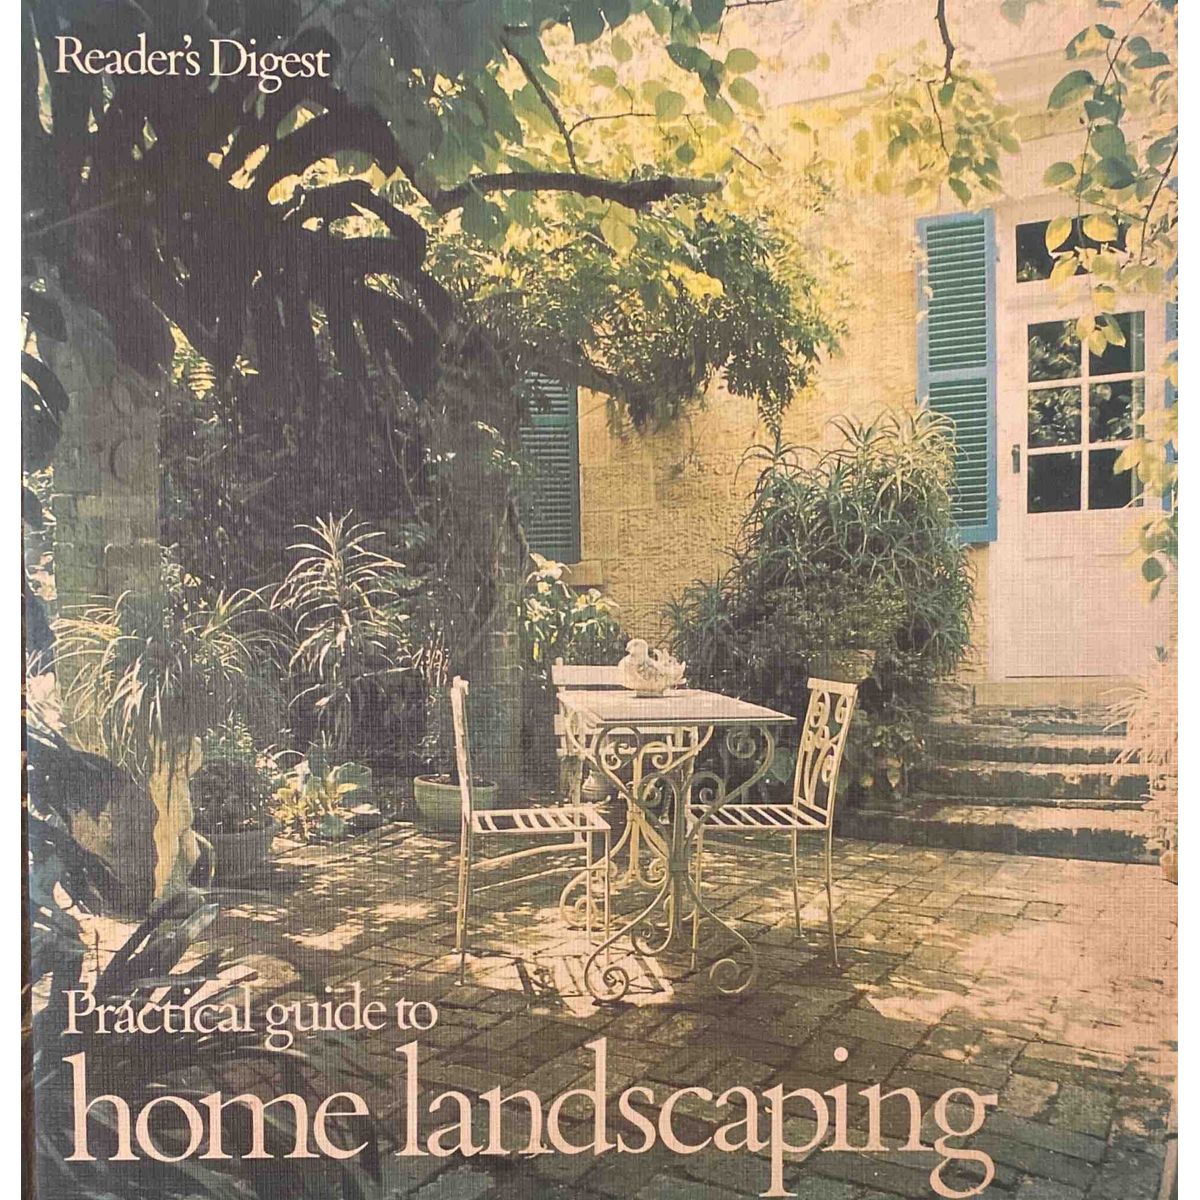 ISBN: 9780949819161 / 0949819166 - Practical Guide to Home Landscaping by Reader's Digest, 3rd Edition [1983]